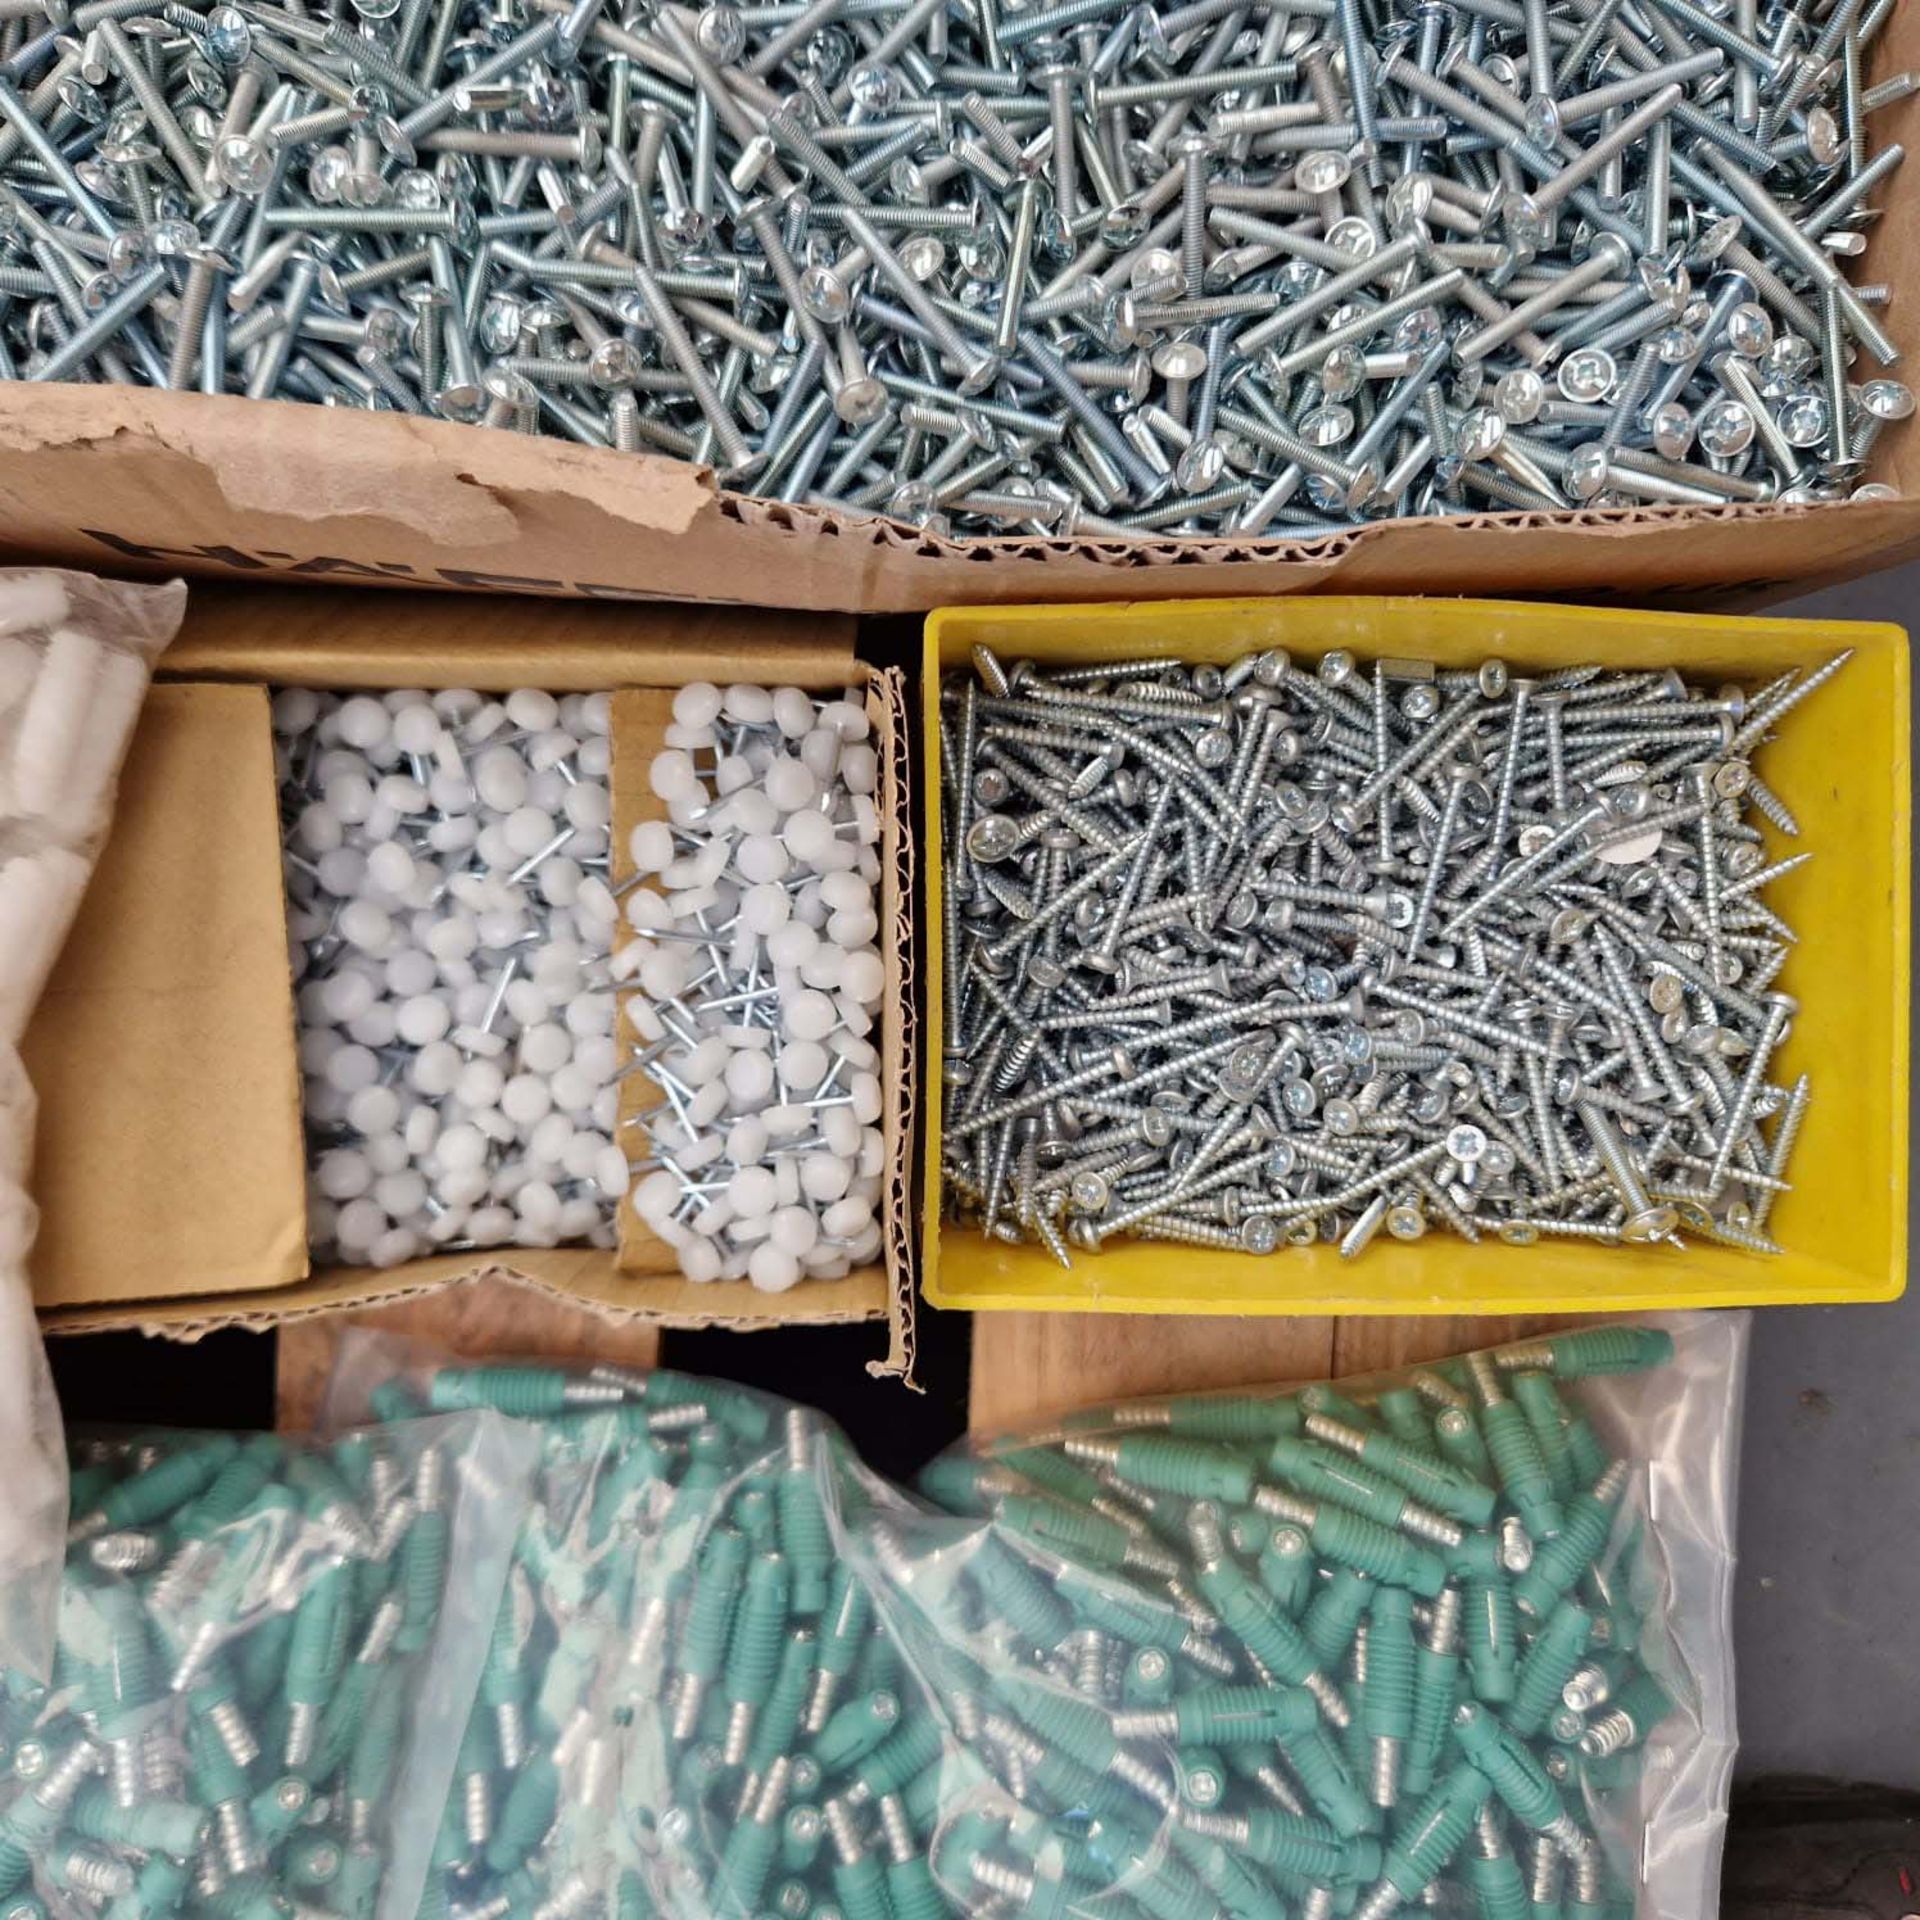 Quantity of Various Screws, Dowels & Hinges Etc. For Woodworking. - Image 13 of 24